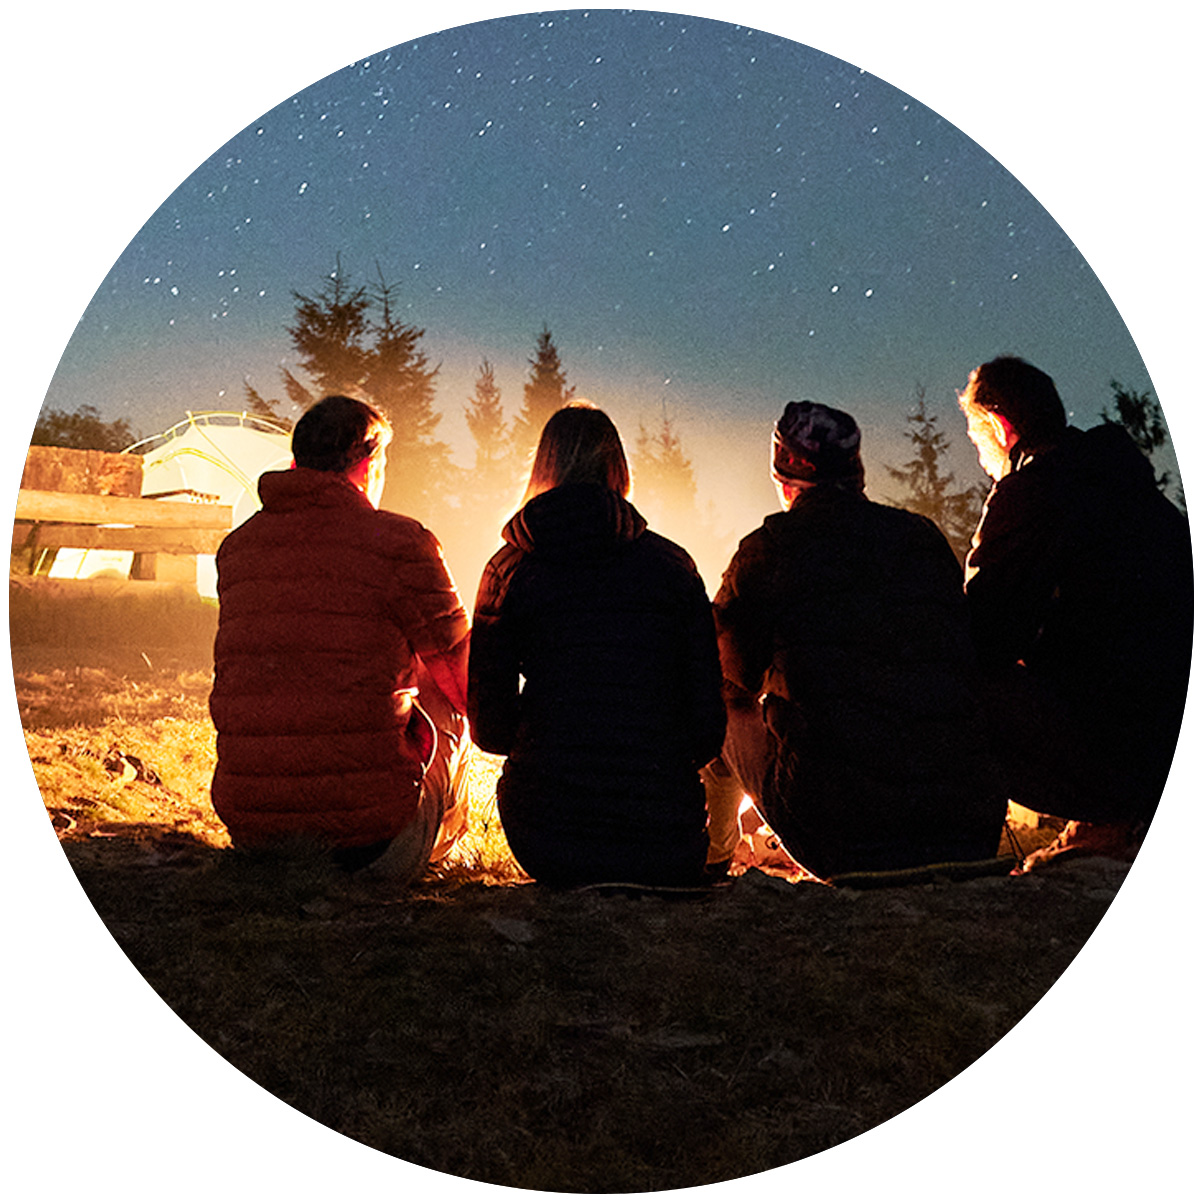 Four people sitting at a campfire